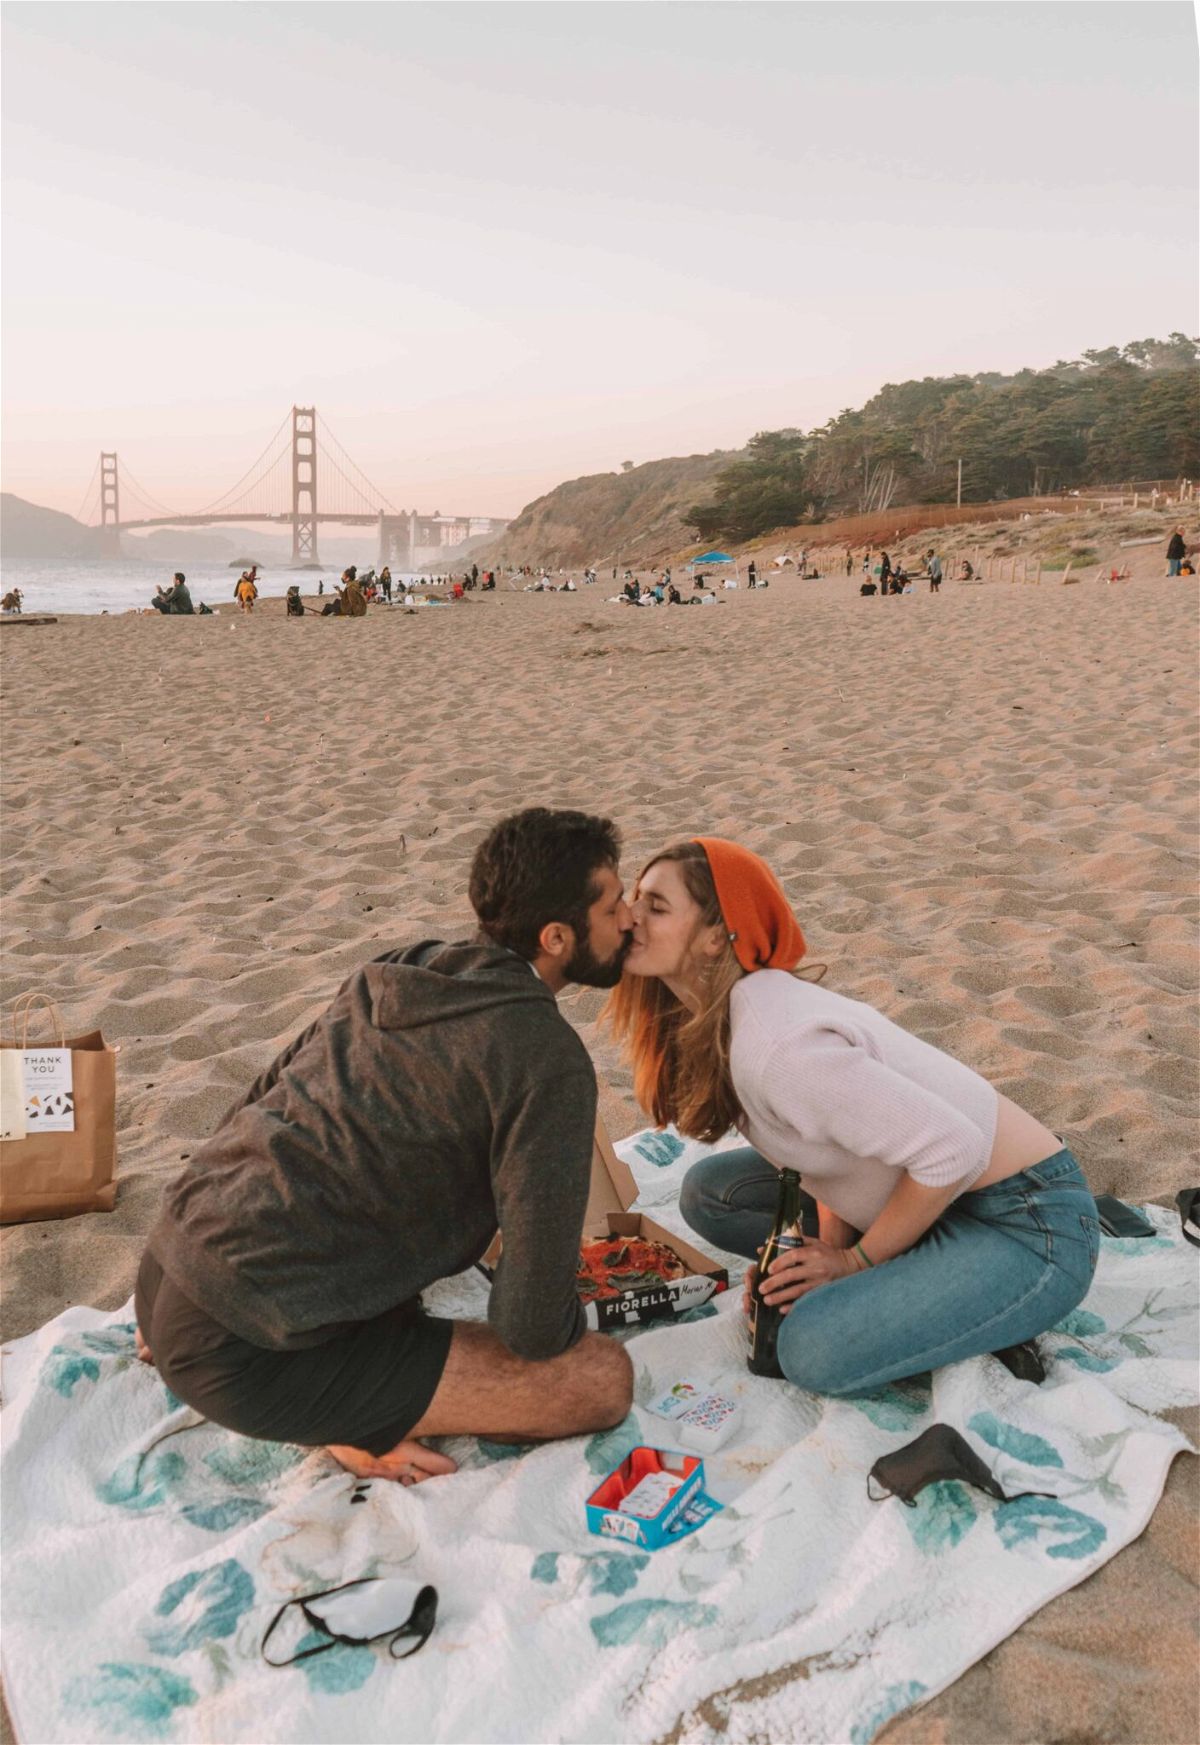 A man and woman share a kiss over a pizza and a bottle of champagne, sitting on a picnic blanket on the beach with the Golden Gate Bridge in the background.